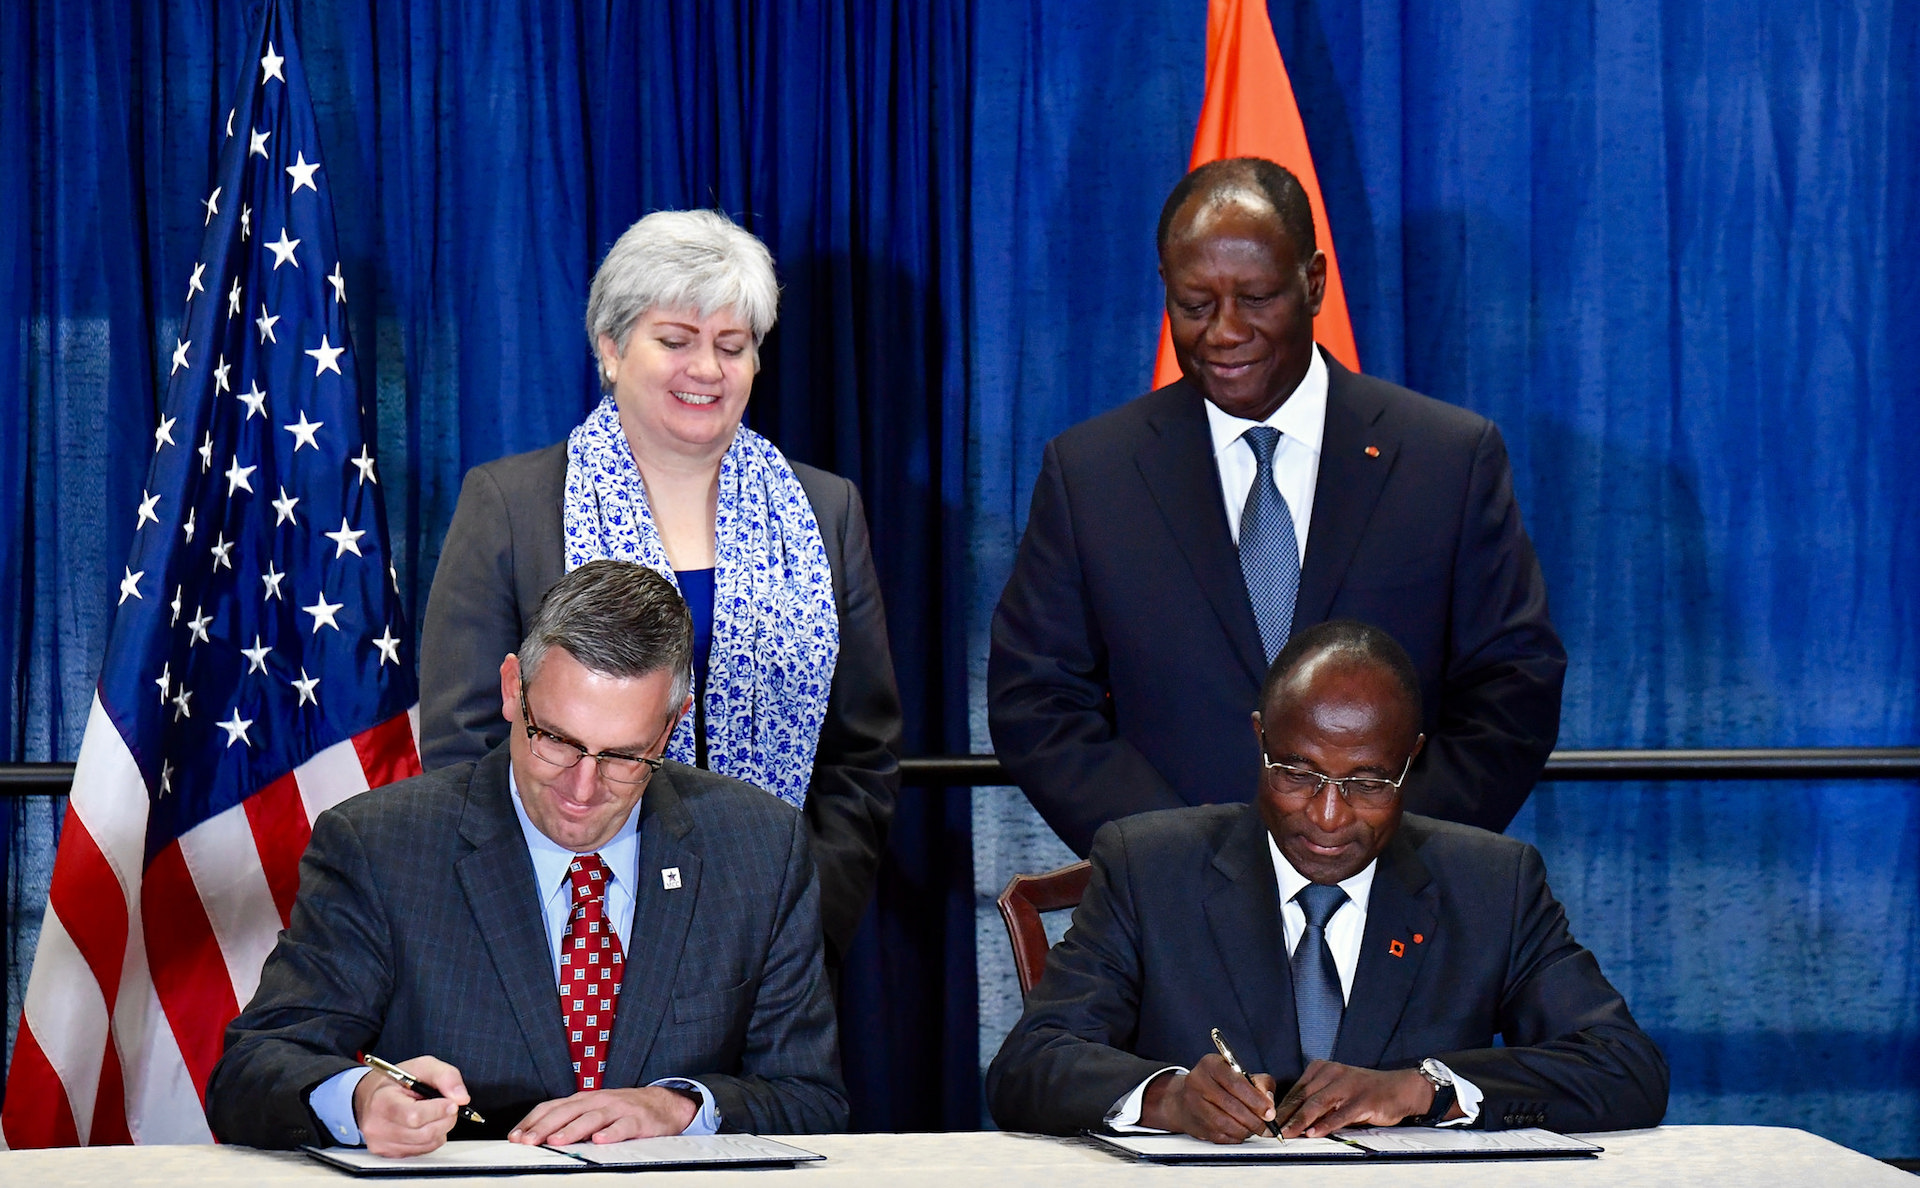 MCC Acting CEO Jonathan Nash, left, and Côte d’Ivoire Minister of Economy and Finance Adama Koné, right, sign the Côte d’Ivoire compact with Acting Principal Deputy Assistant Secretary of African Affairs Stephanie Sullivan and Côte d’Ivoire President Alassane Ouattara on Tuesday, Nov. 7, 2017, at the U.S. Department of State in Washington, D.C.